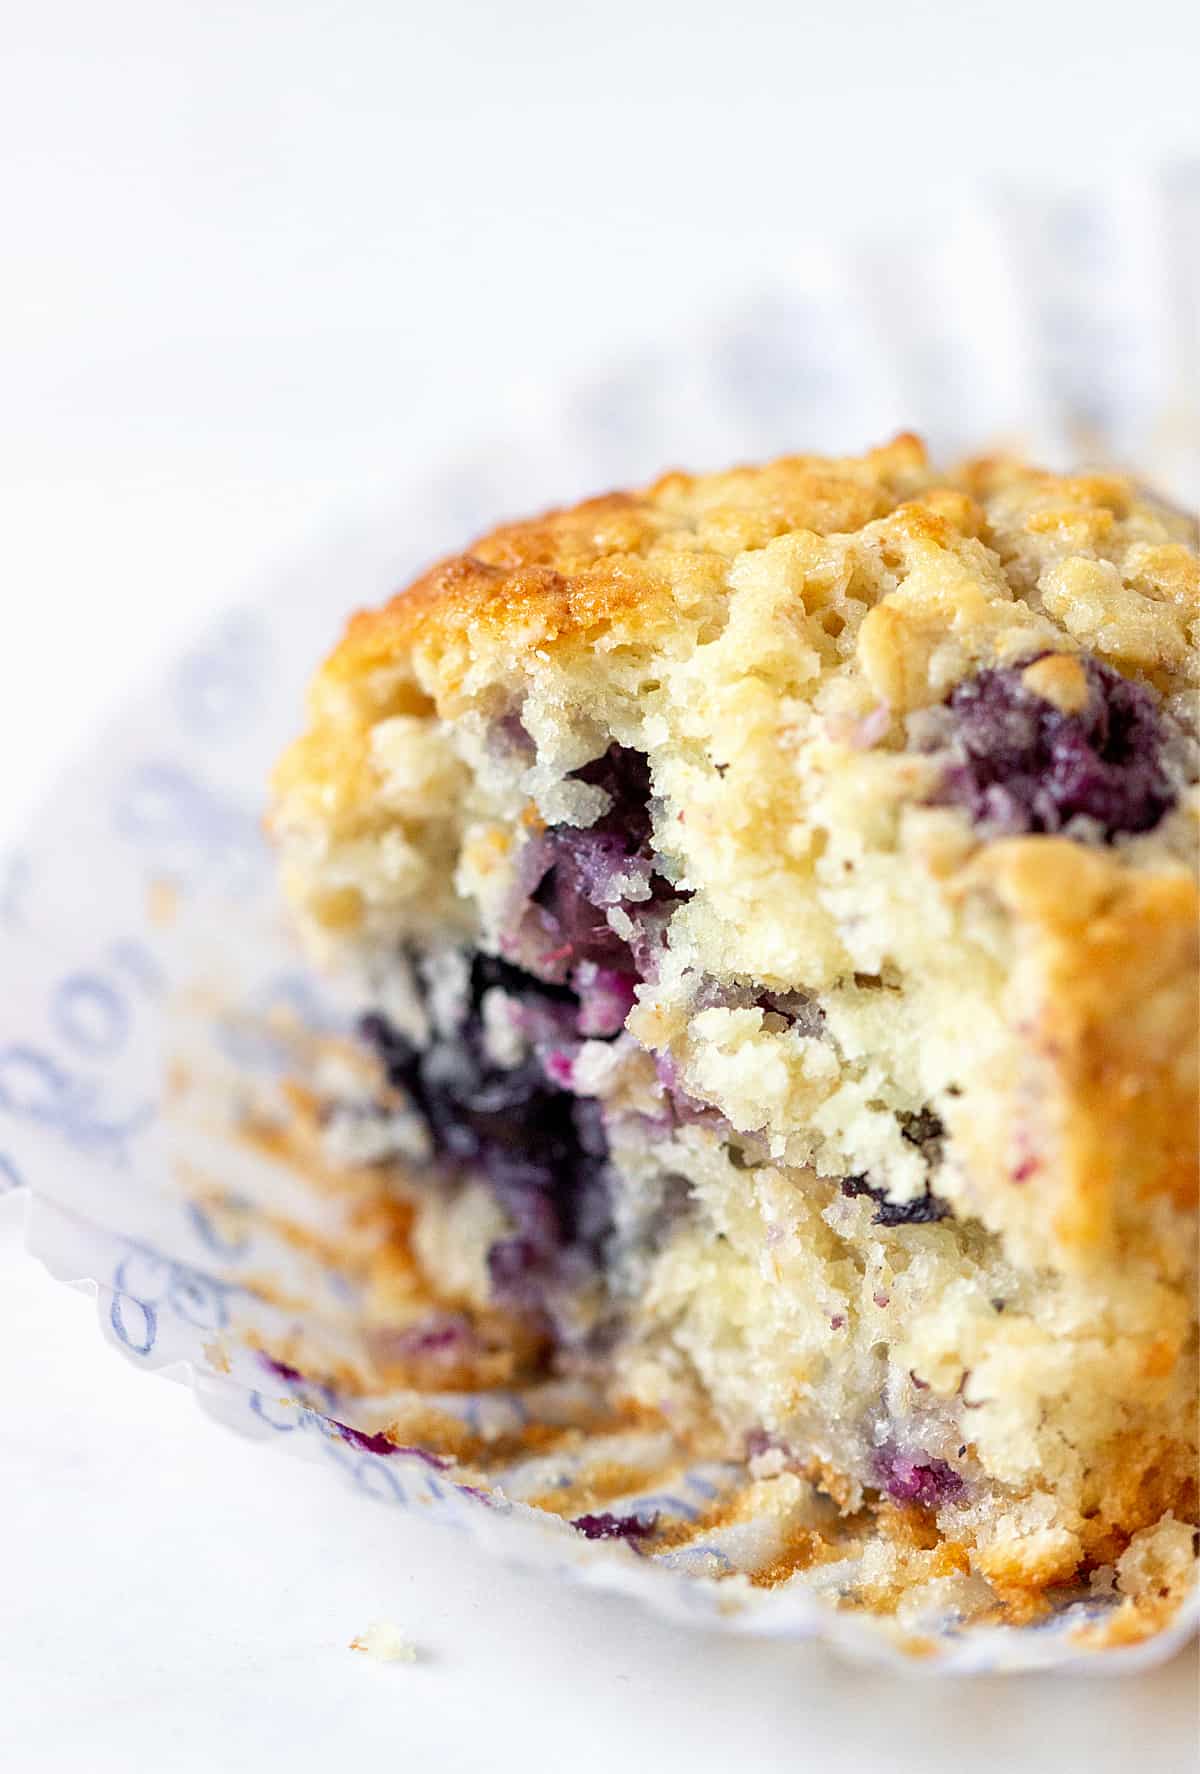 Half blueberry muffin in opened paper cup, white surface